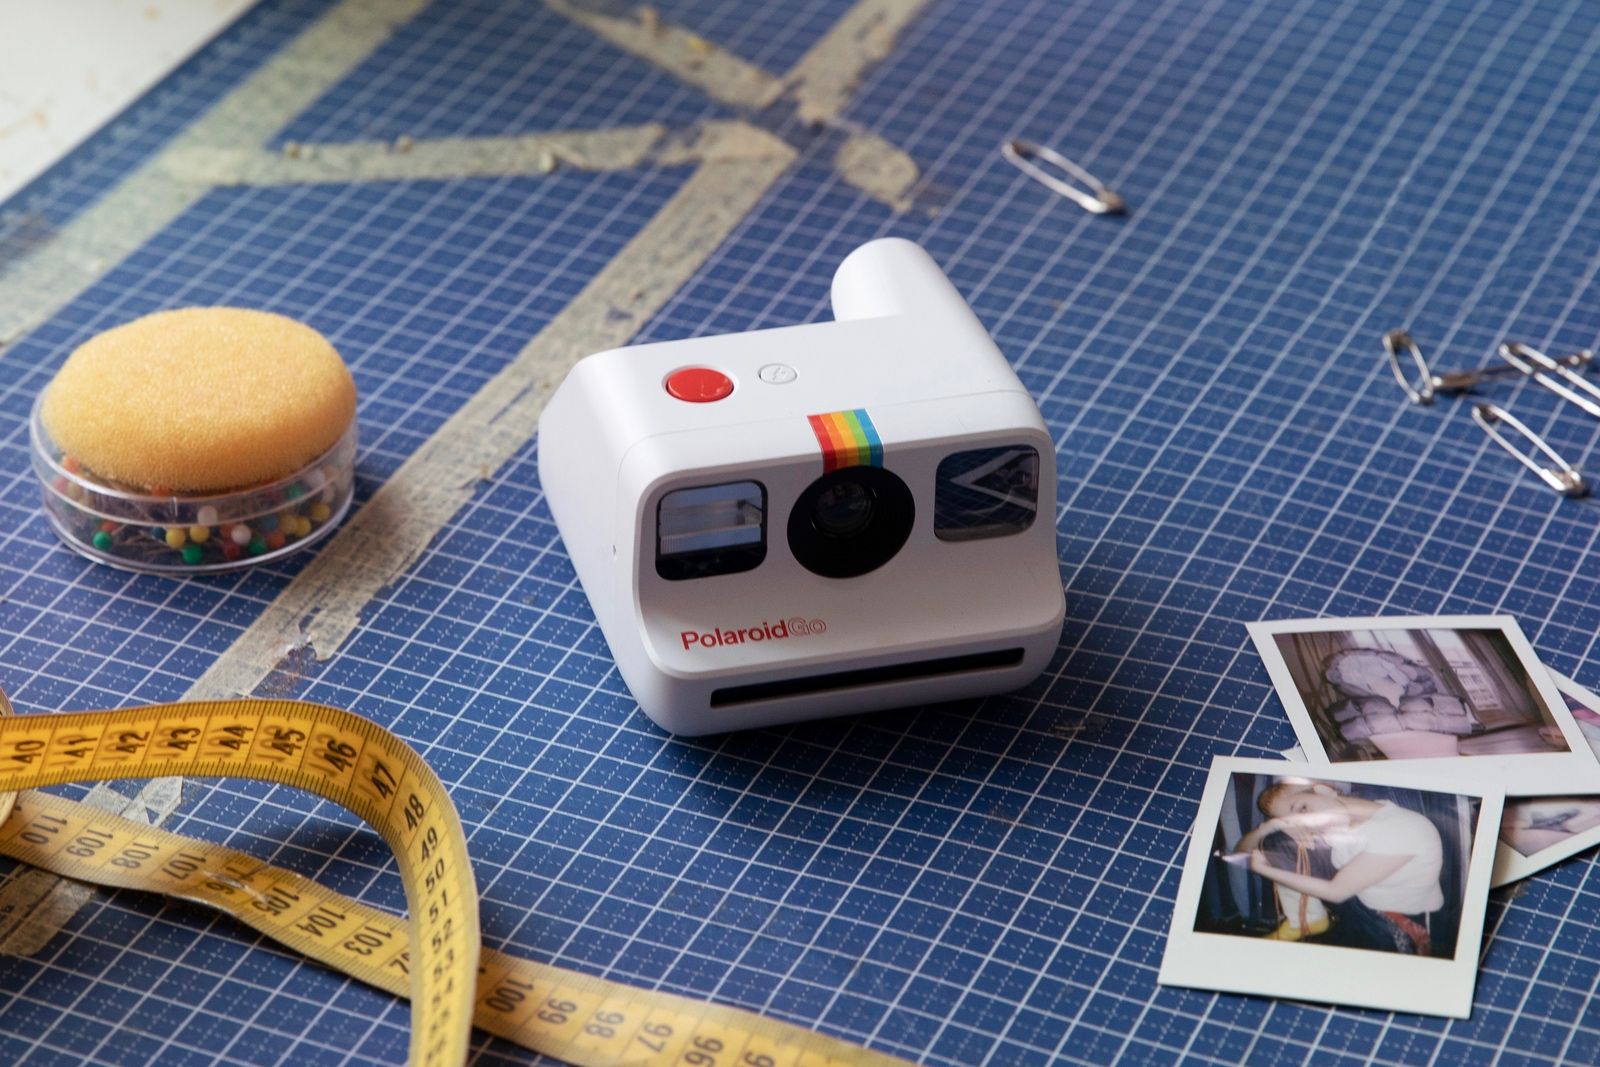 Kick it old-school with a new all-time low on the compact Polaroid Go camera